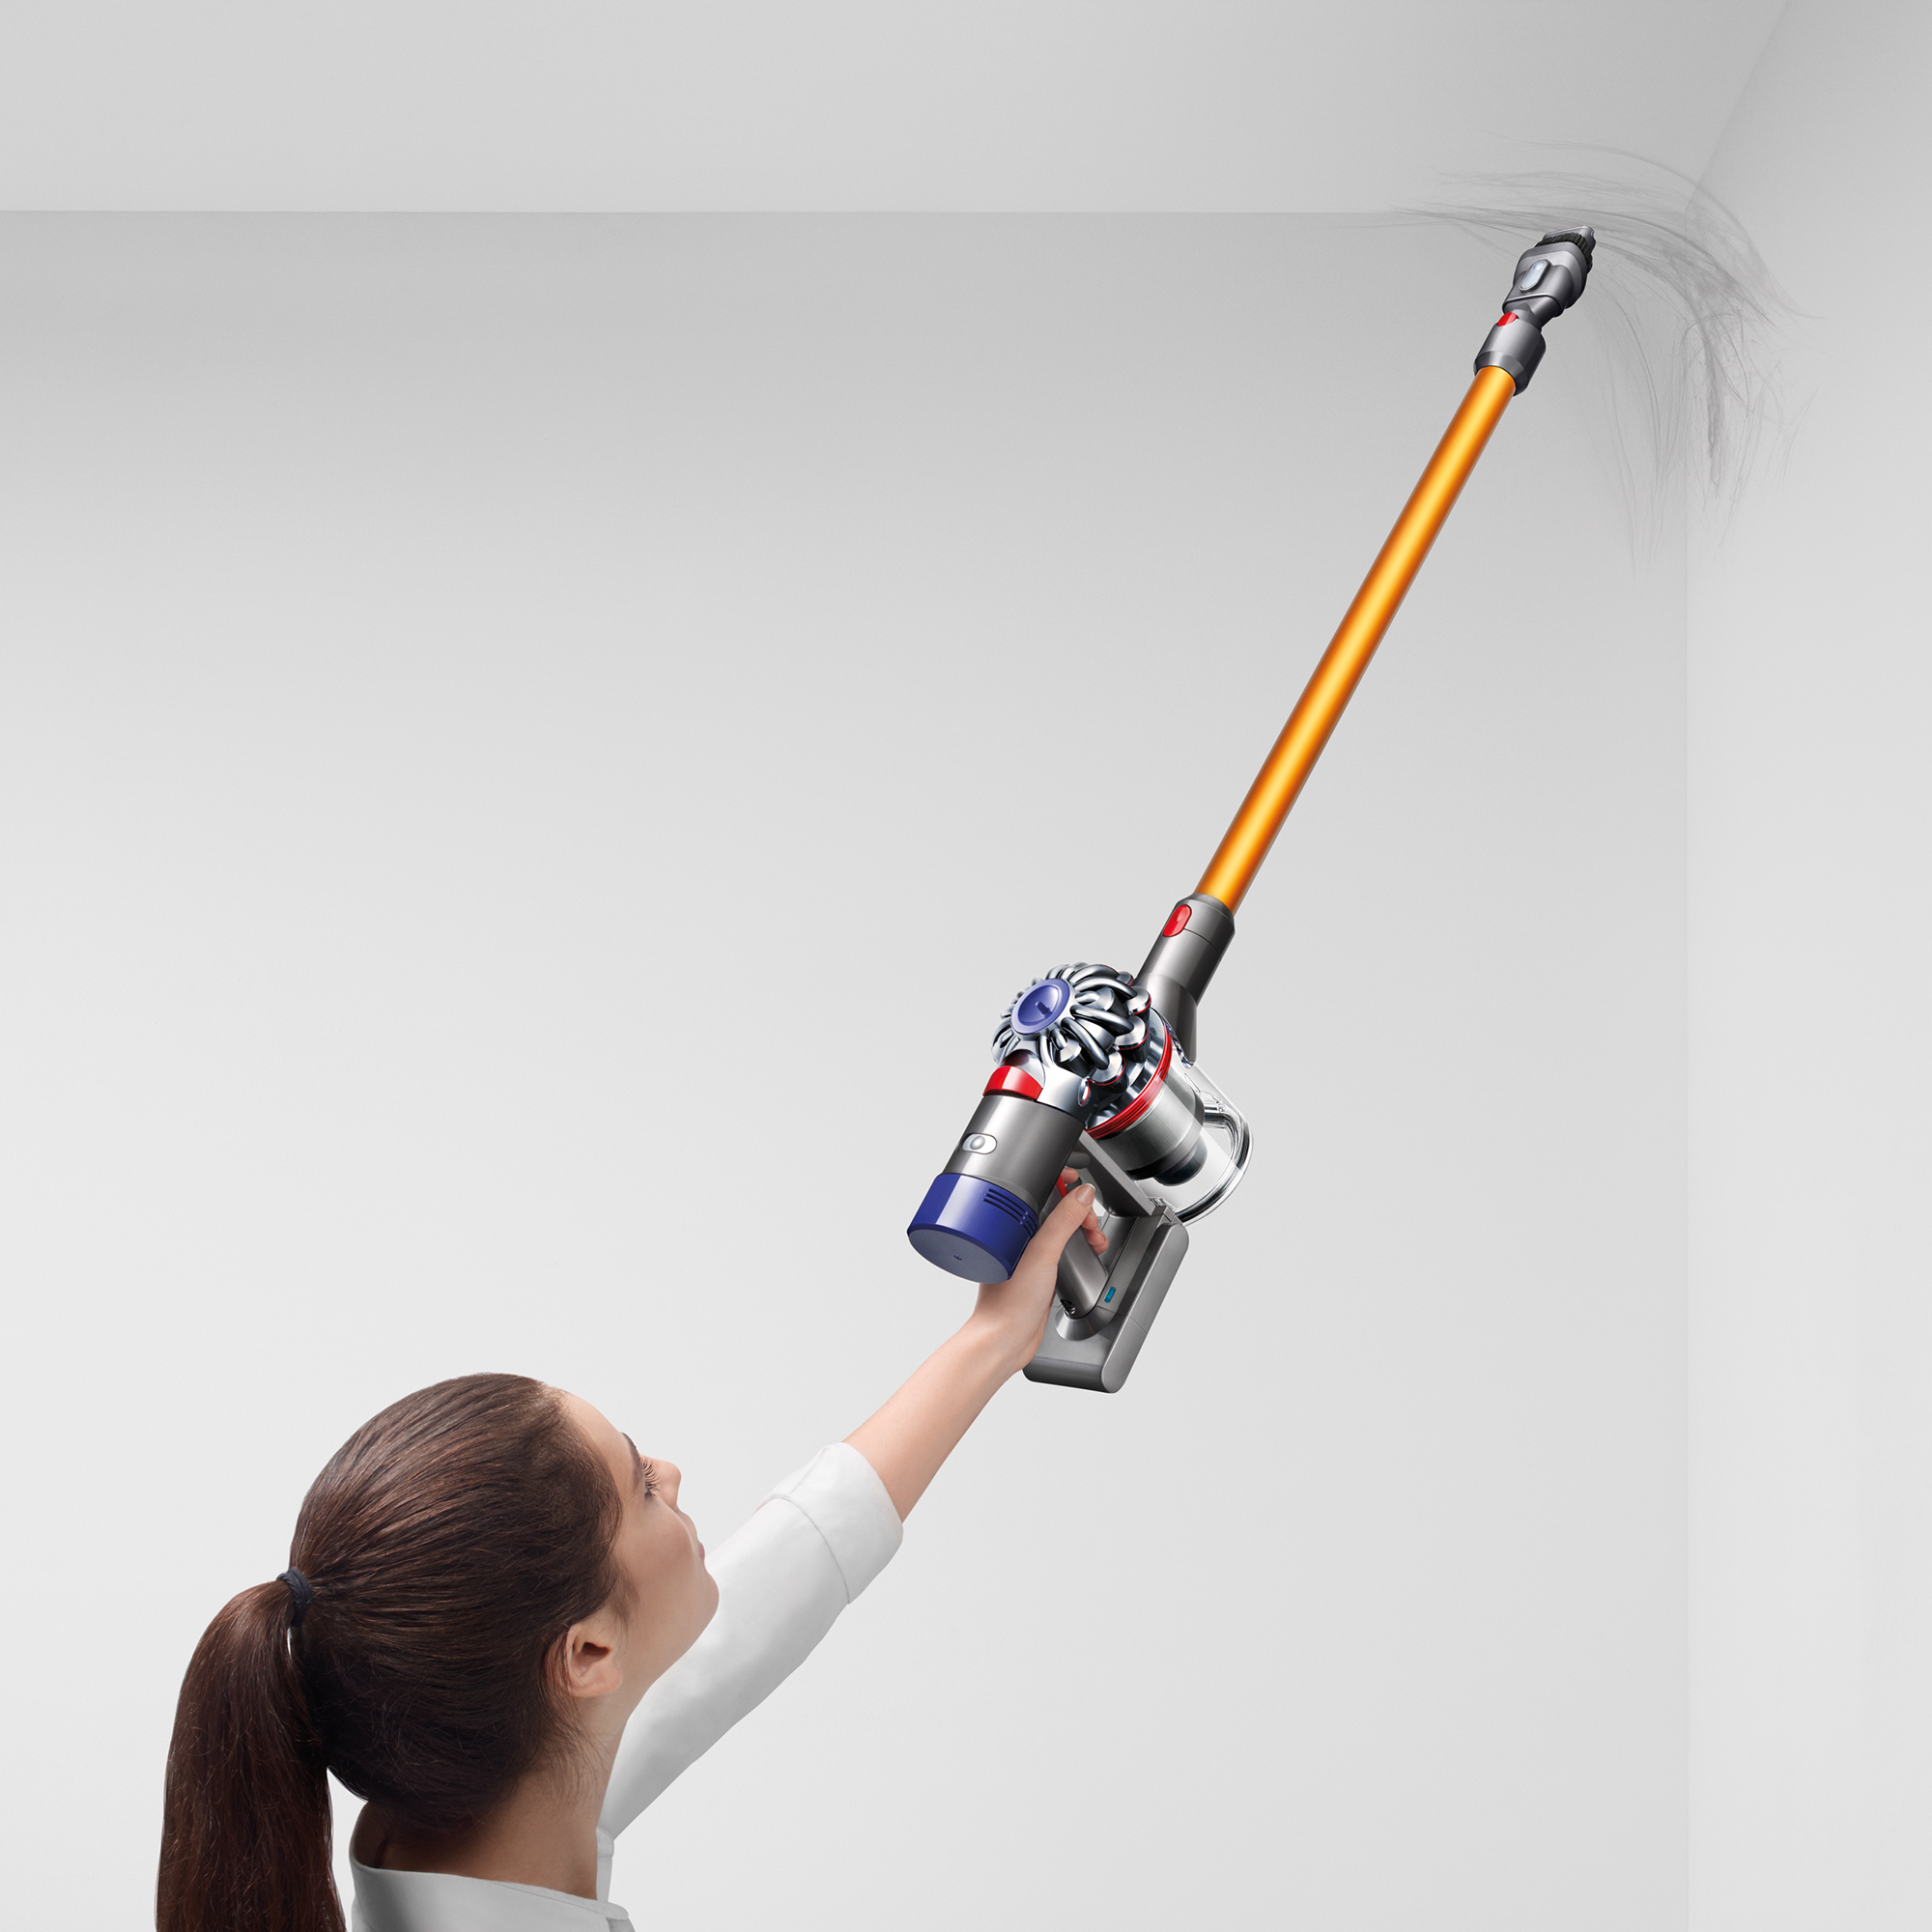 Dyson - V8 Absolute Display Model - image 4 of 6